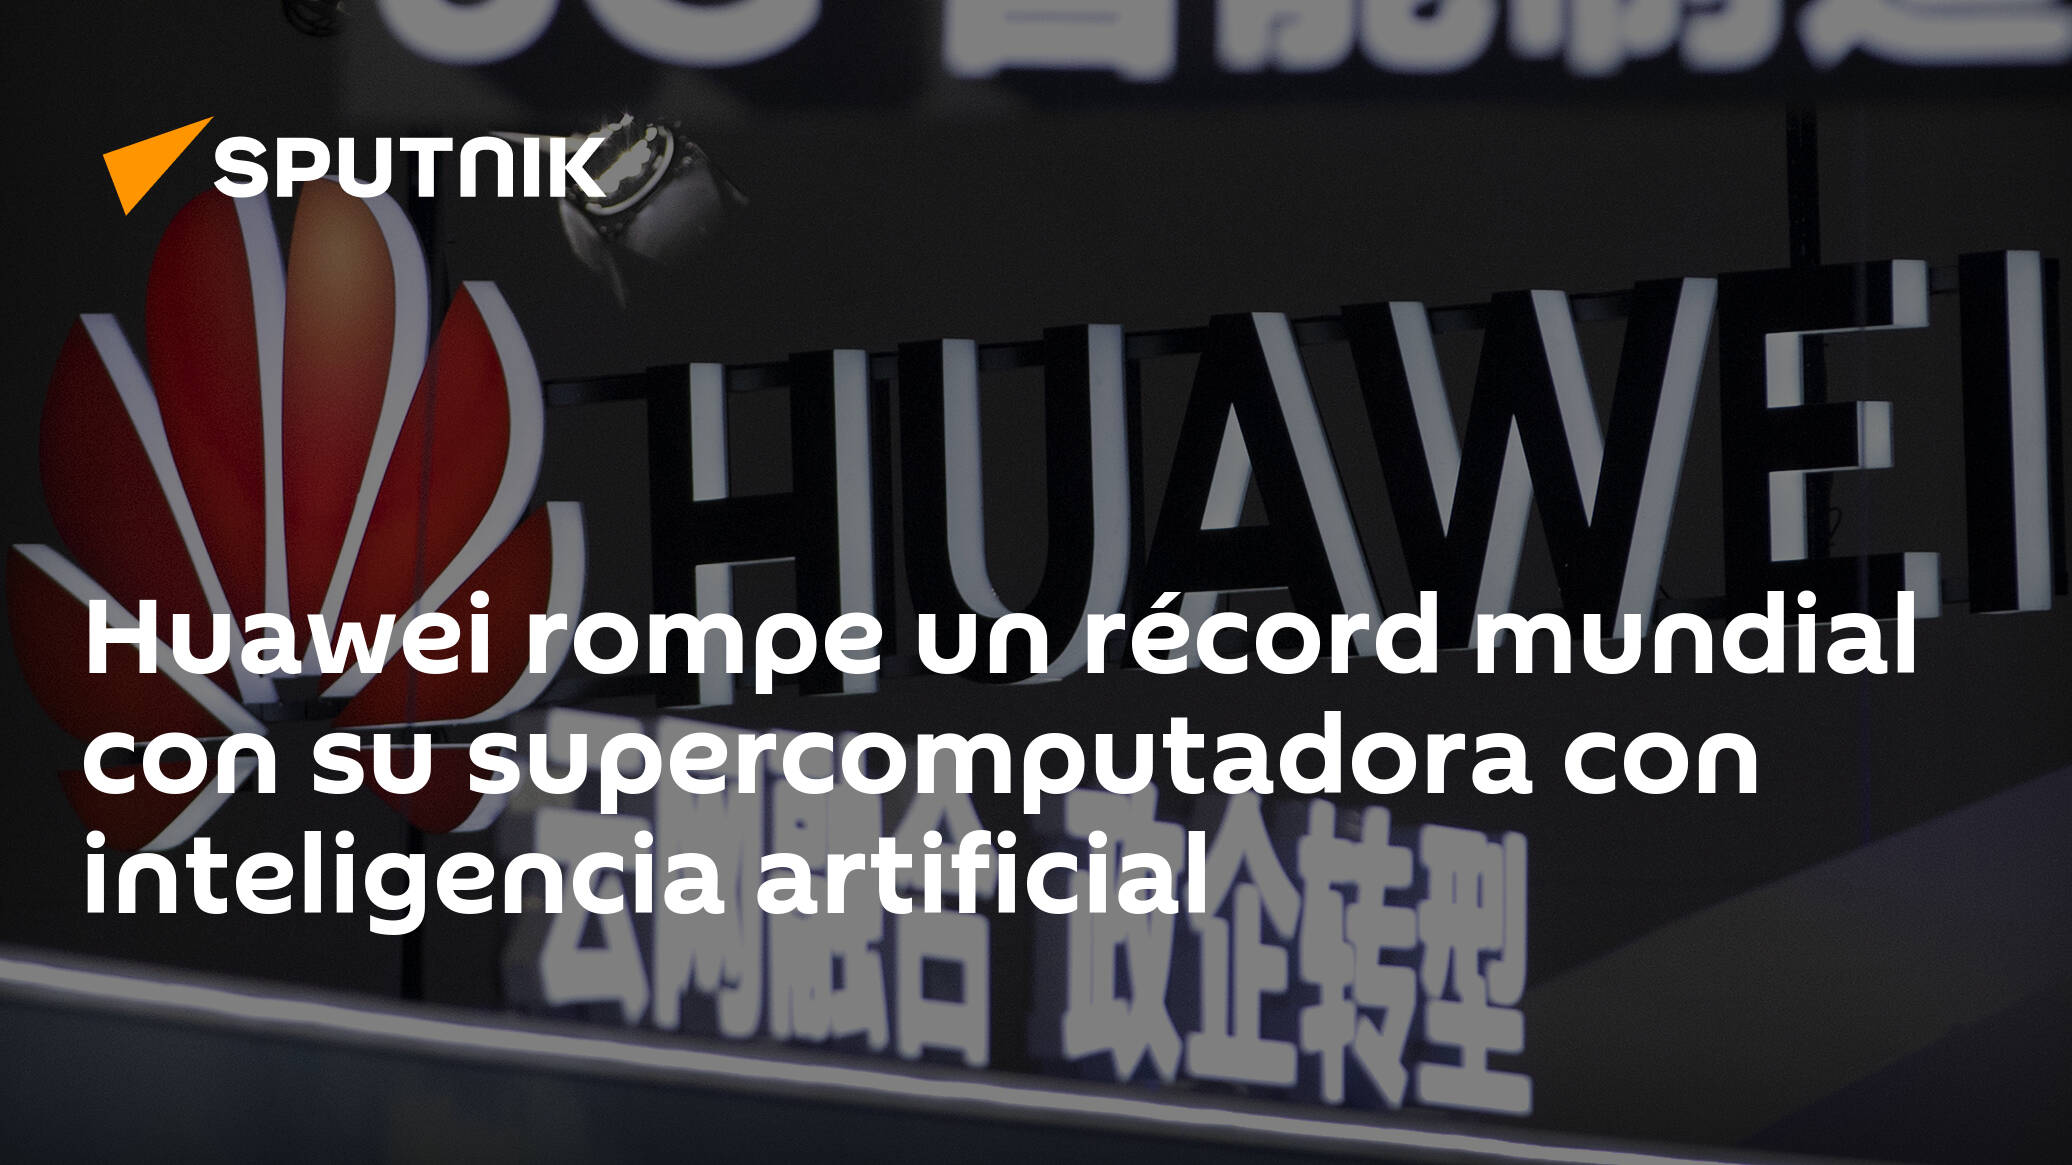 Huawei breaks the world record with its supercomputer with artificial intelligence